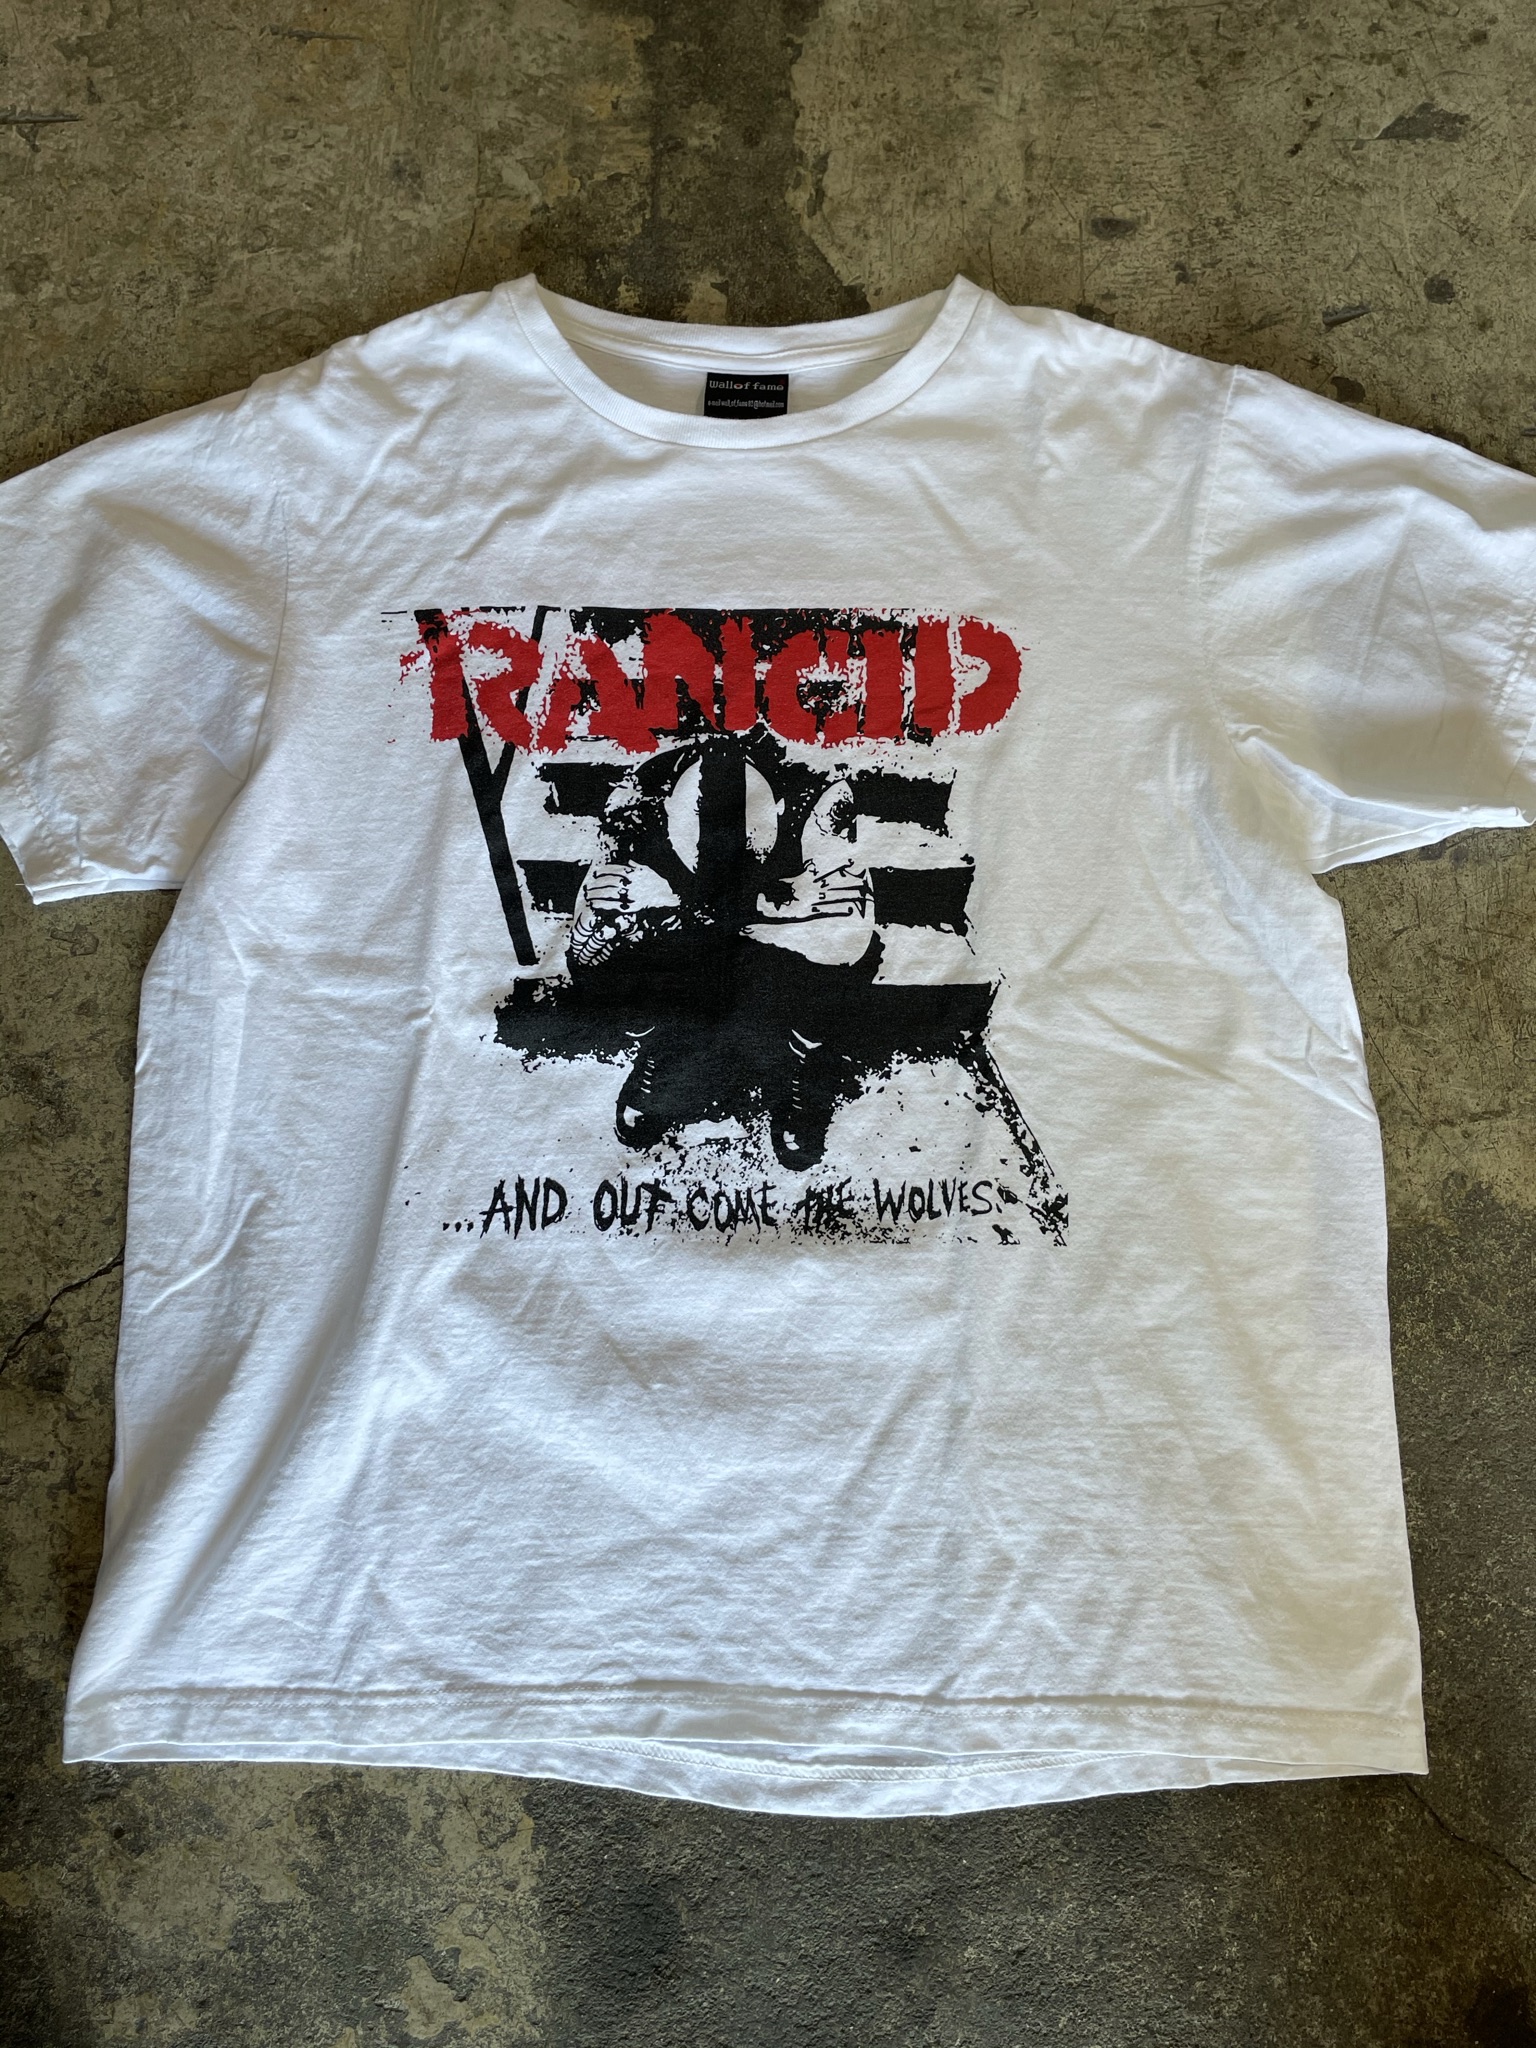 Rancid Tshirt and out come the wolves ランシド バンドT バンT Ｔ